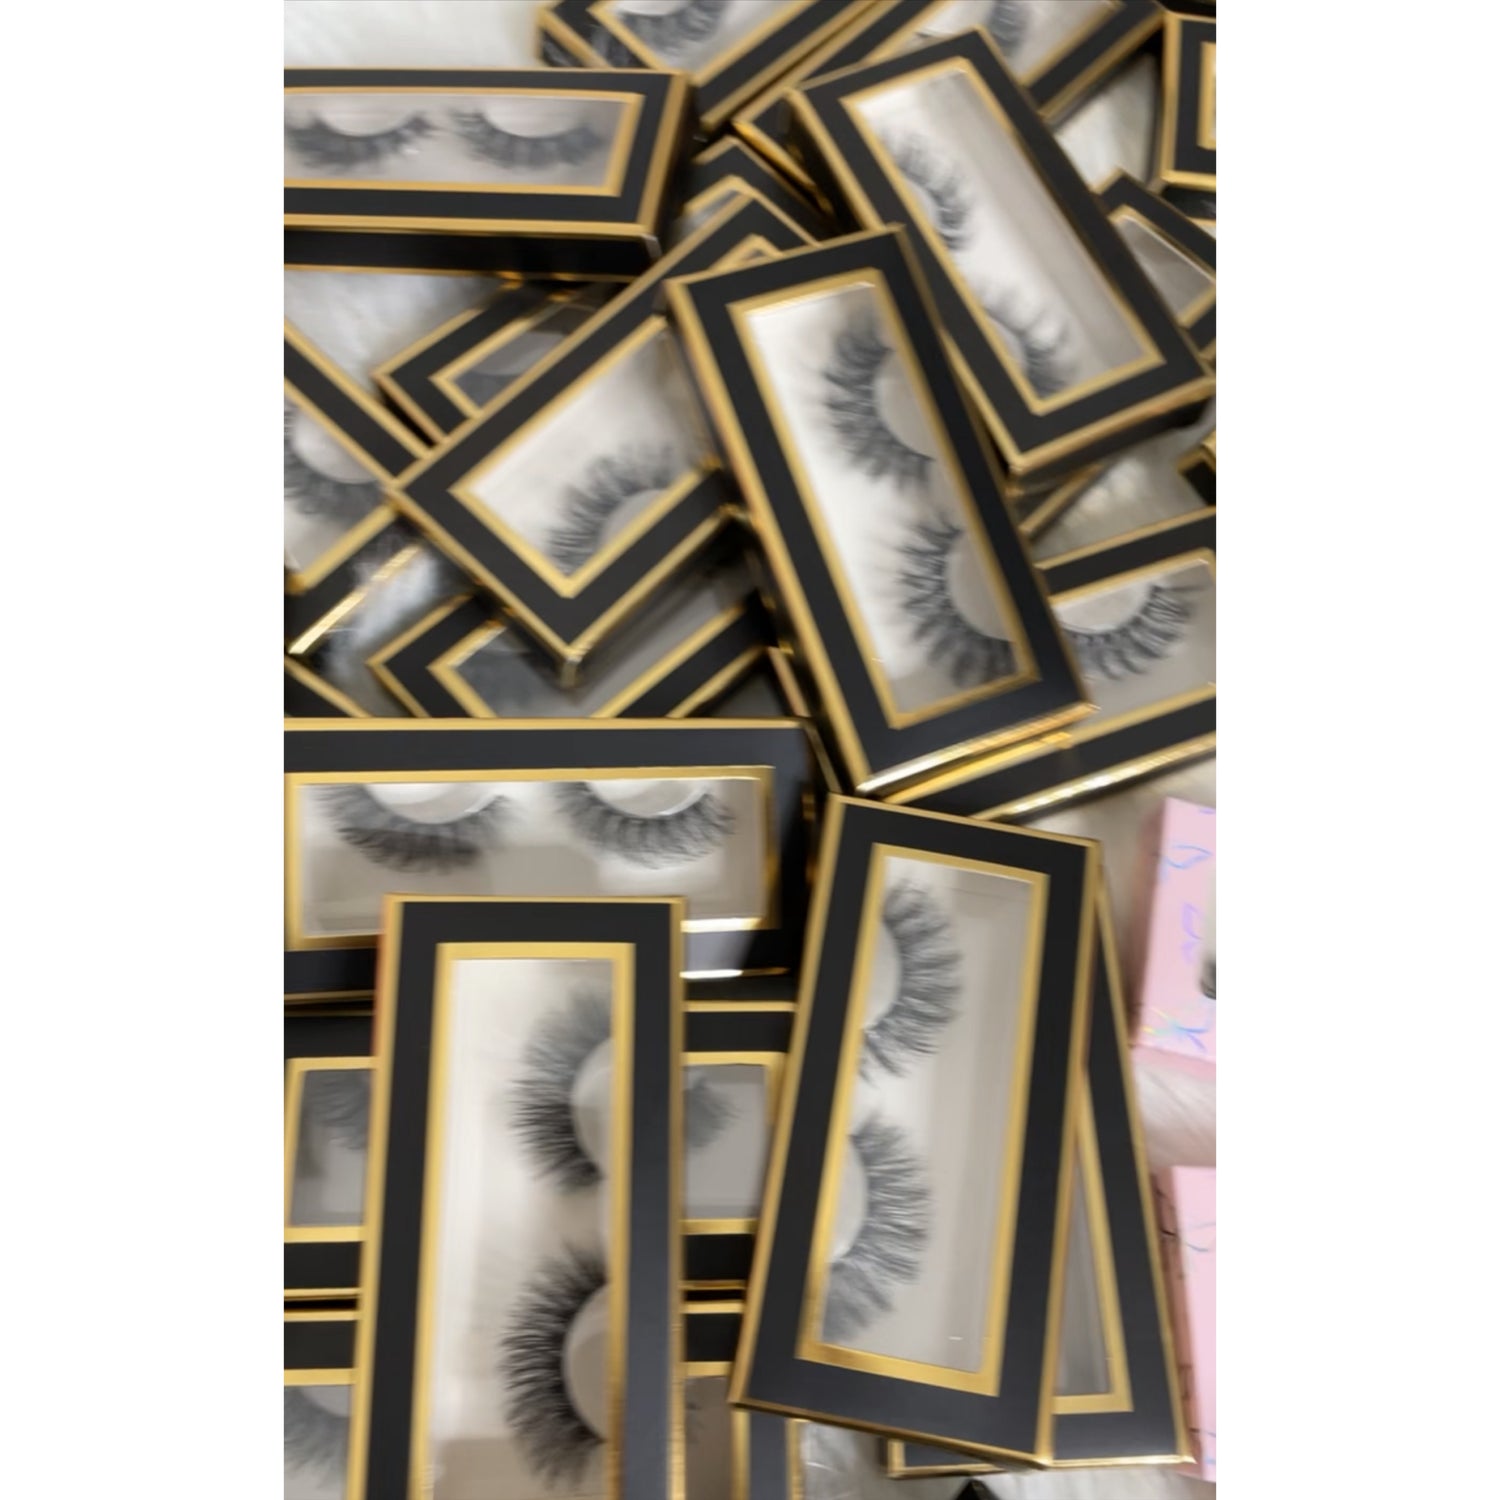 Mink Lashes and more